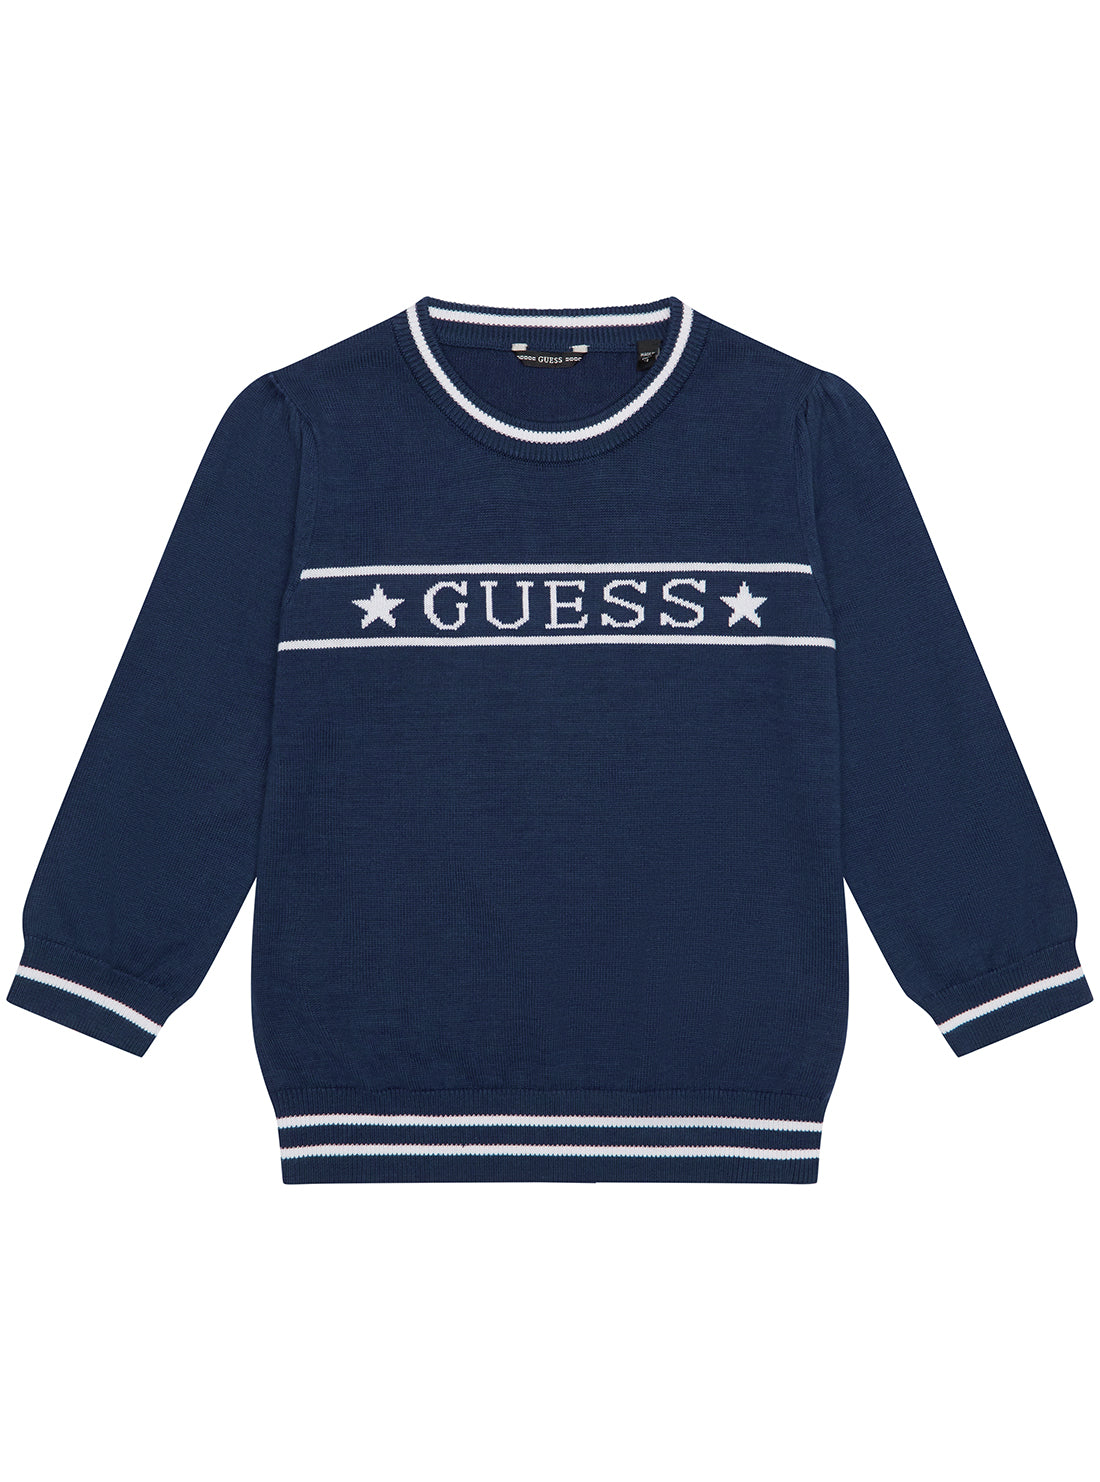 GUESS Navy 3/4 Sleeve Jumper (7-16) front view